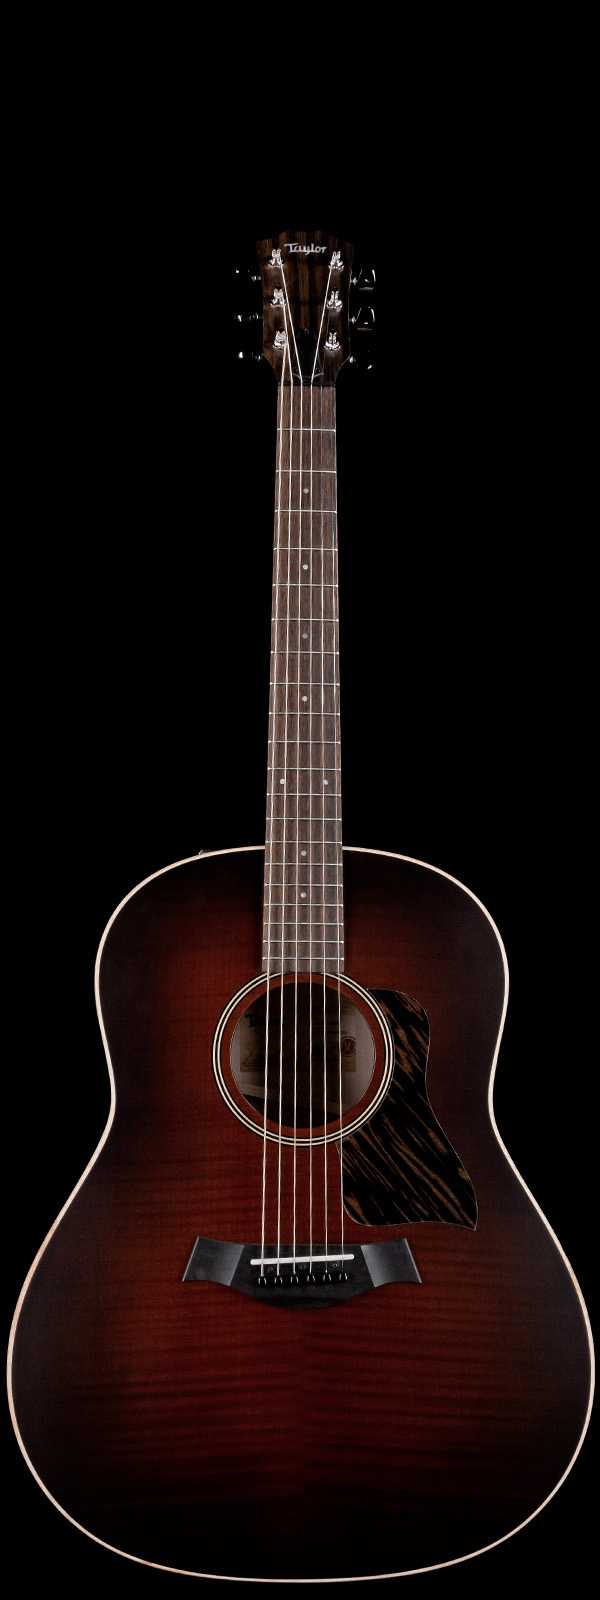 Taylor AD27e American Dream Grand Pacific Flame Top Acoustic-Electric Satin Finish